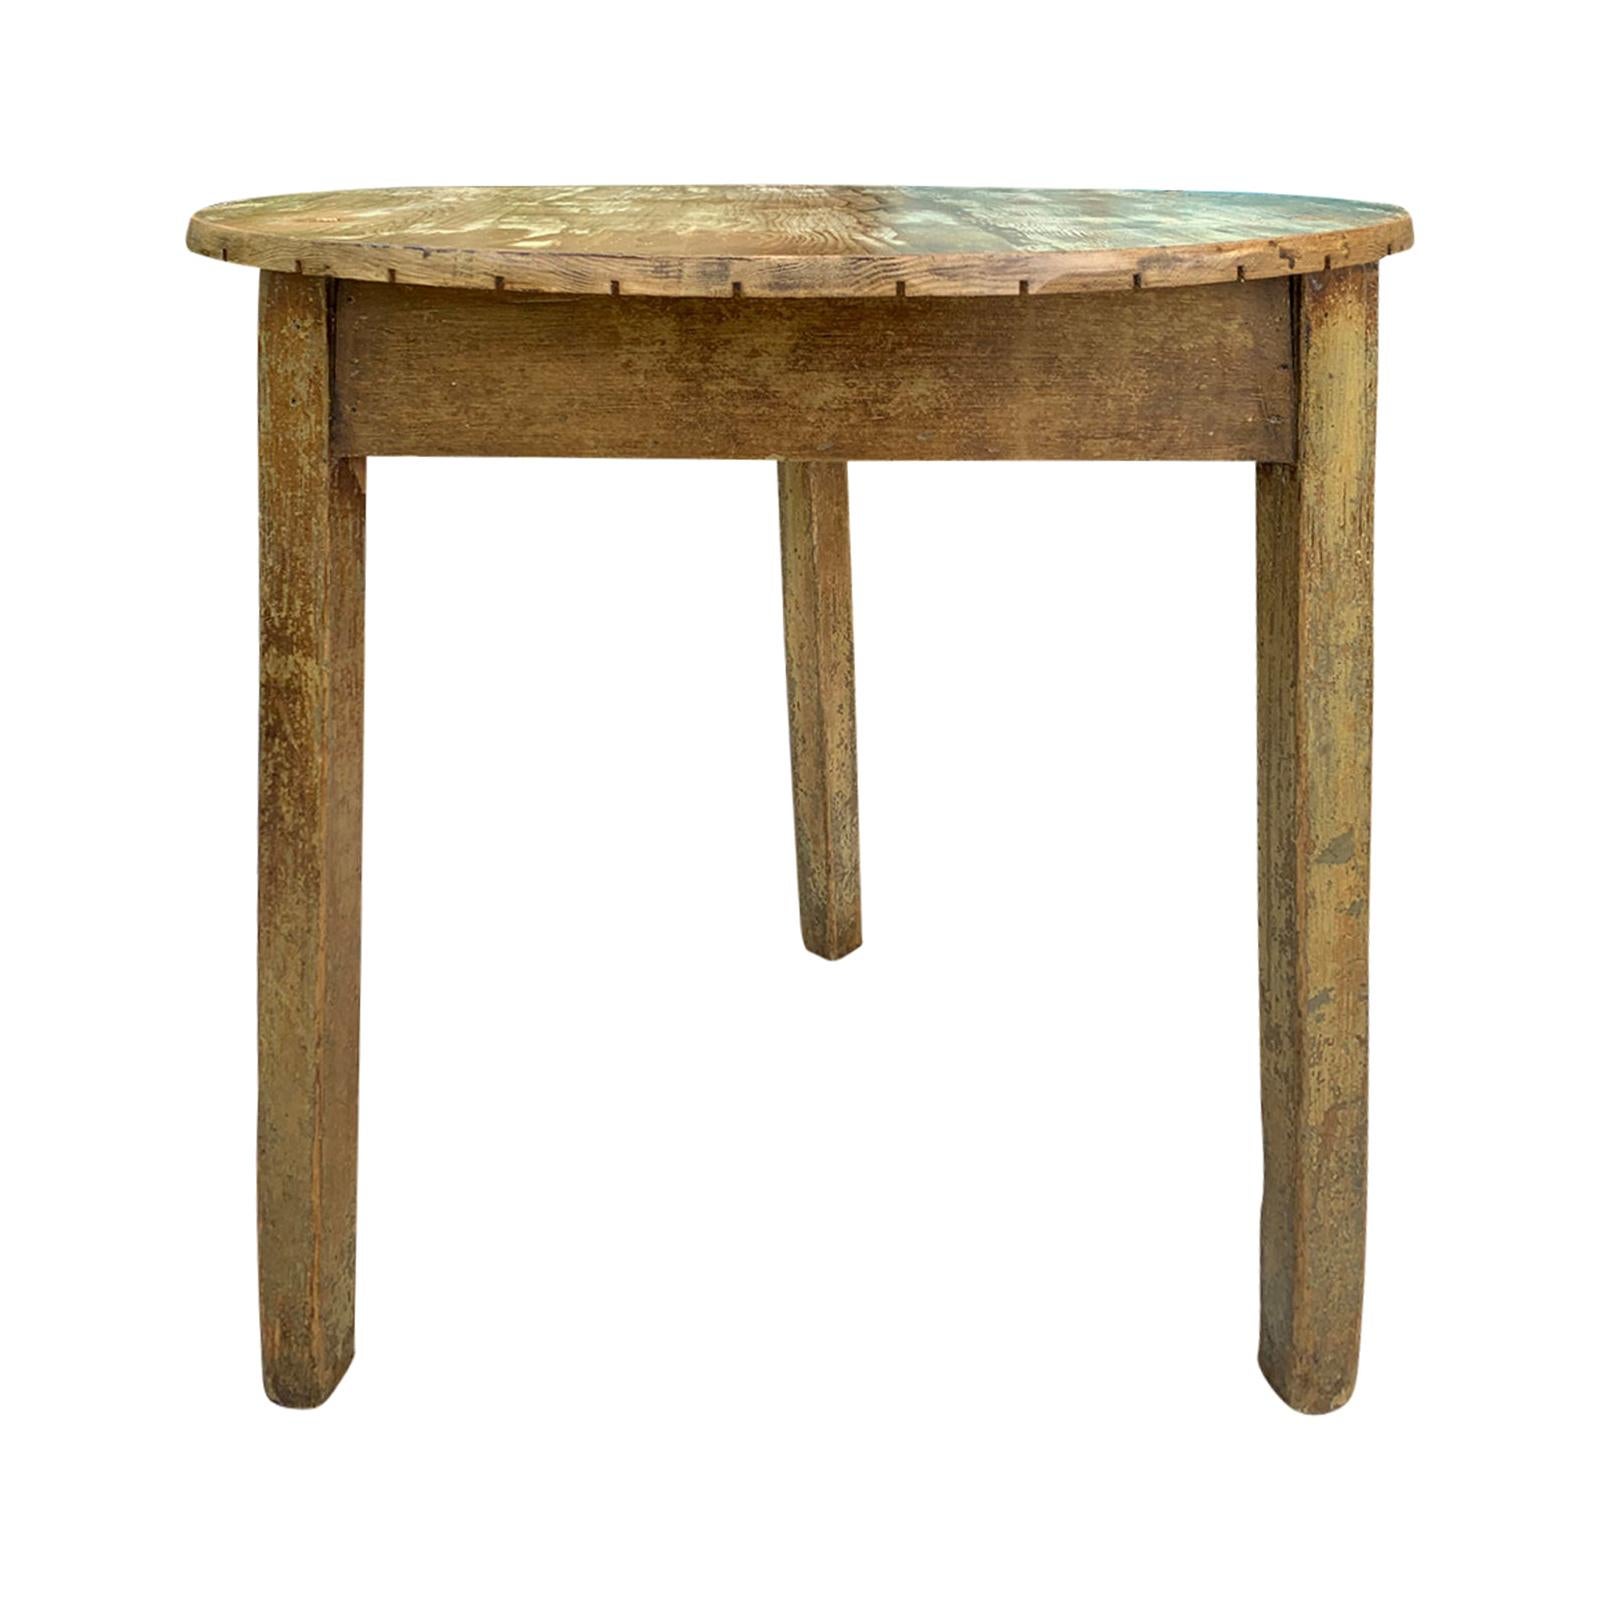 19th Century English Pine Cricket Table with Old Finish